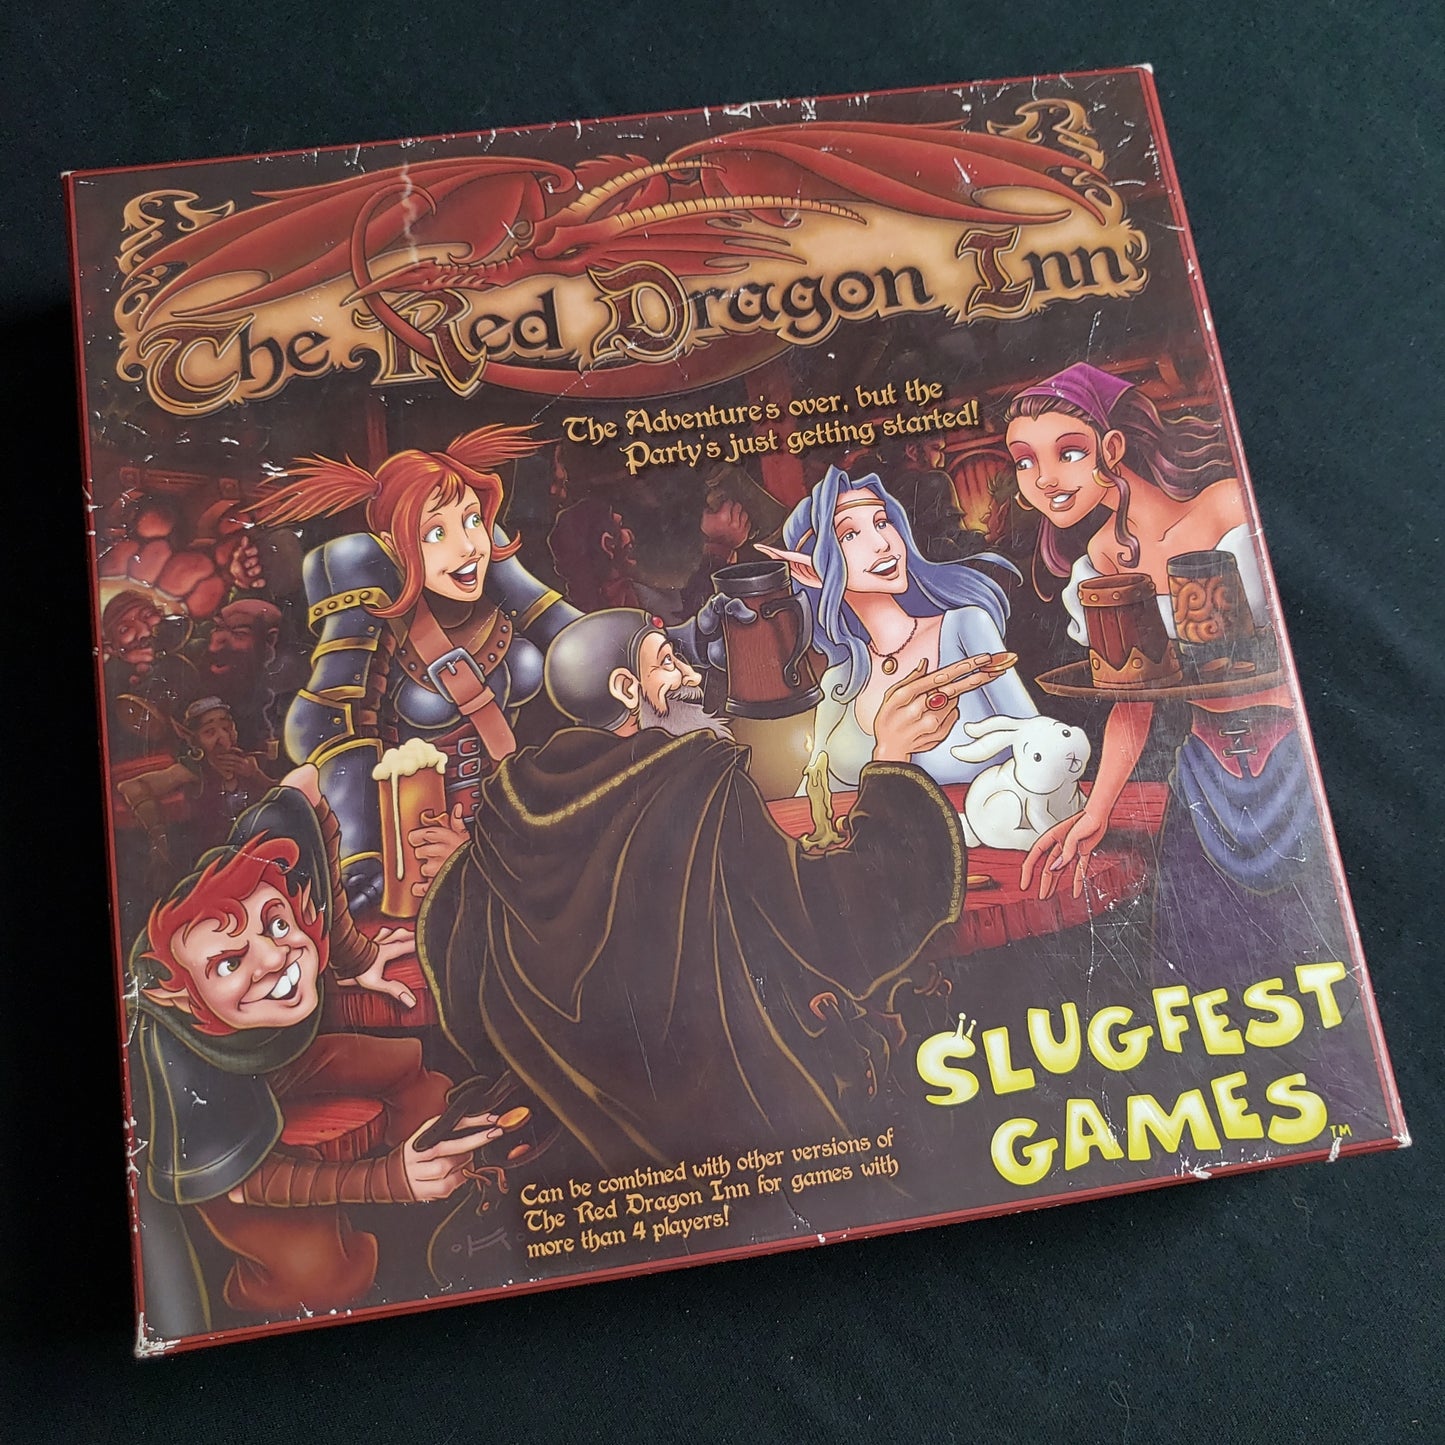 Image shows the front cover of the box of the Red Dragon Inn card game